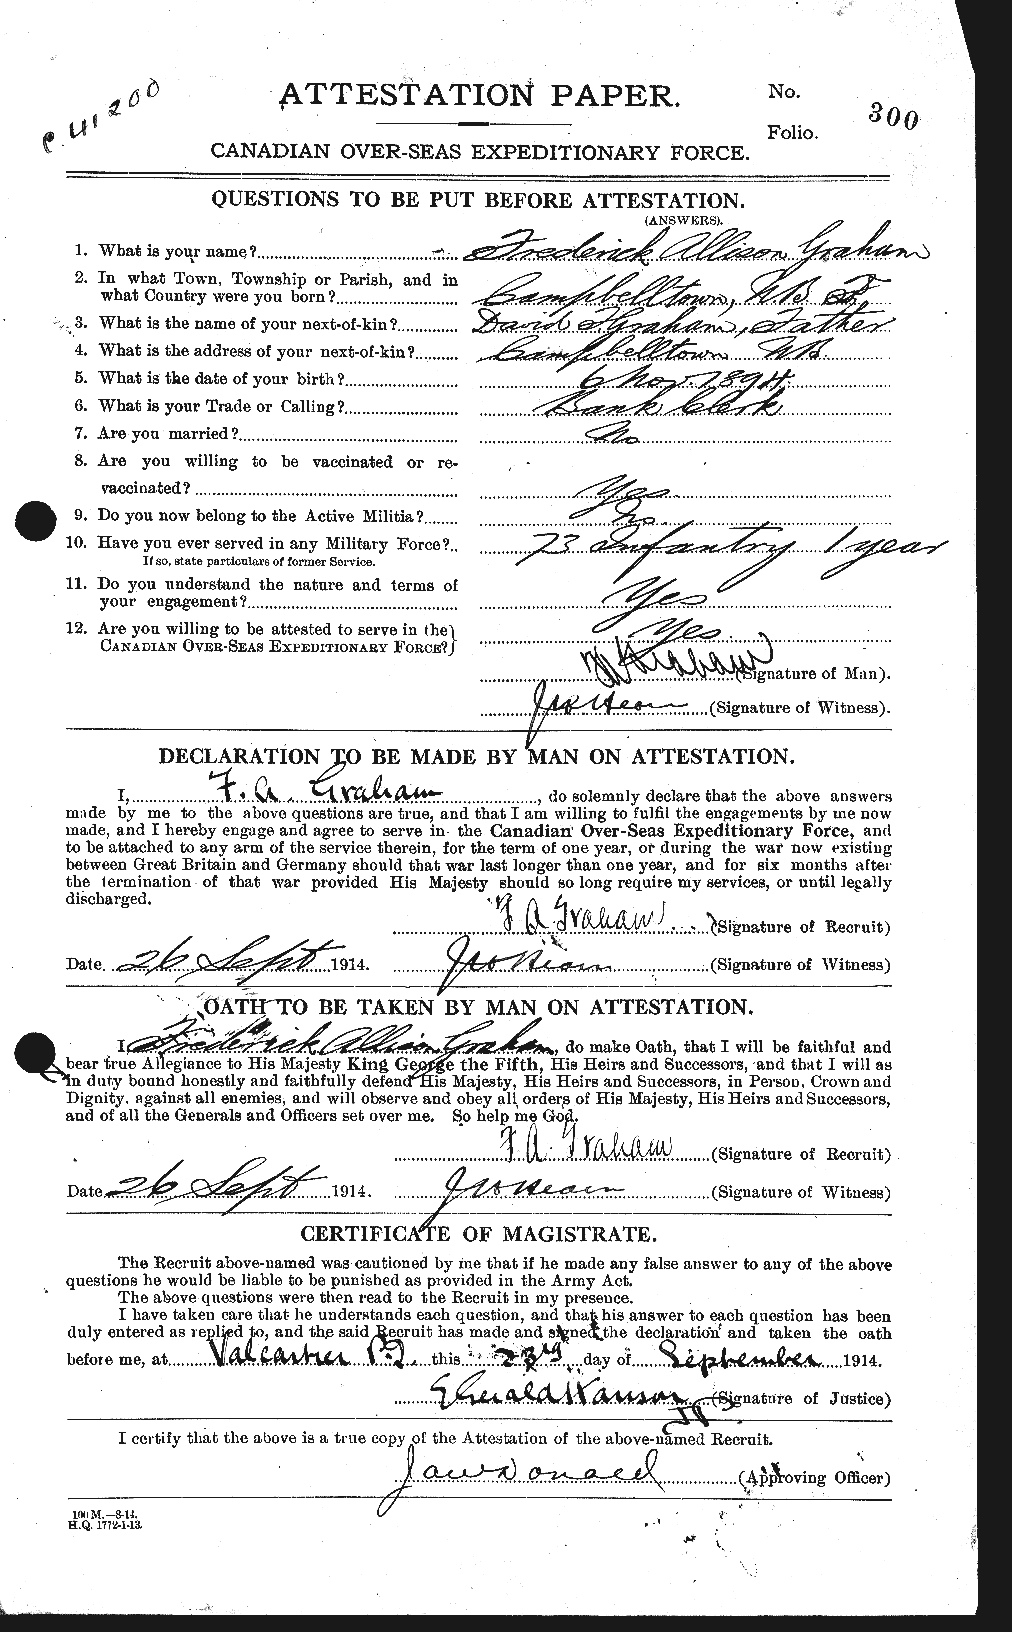 Personnel Records of the First World War - CEF 357606a